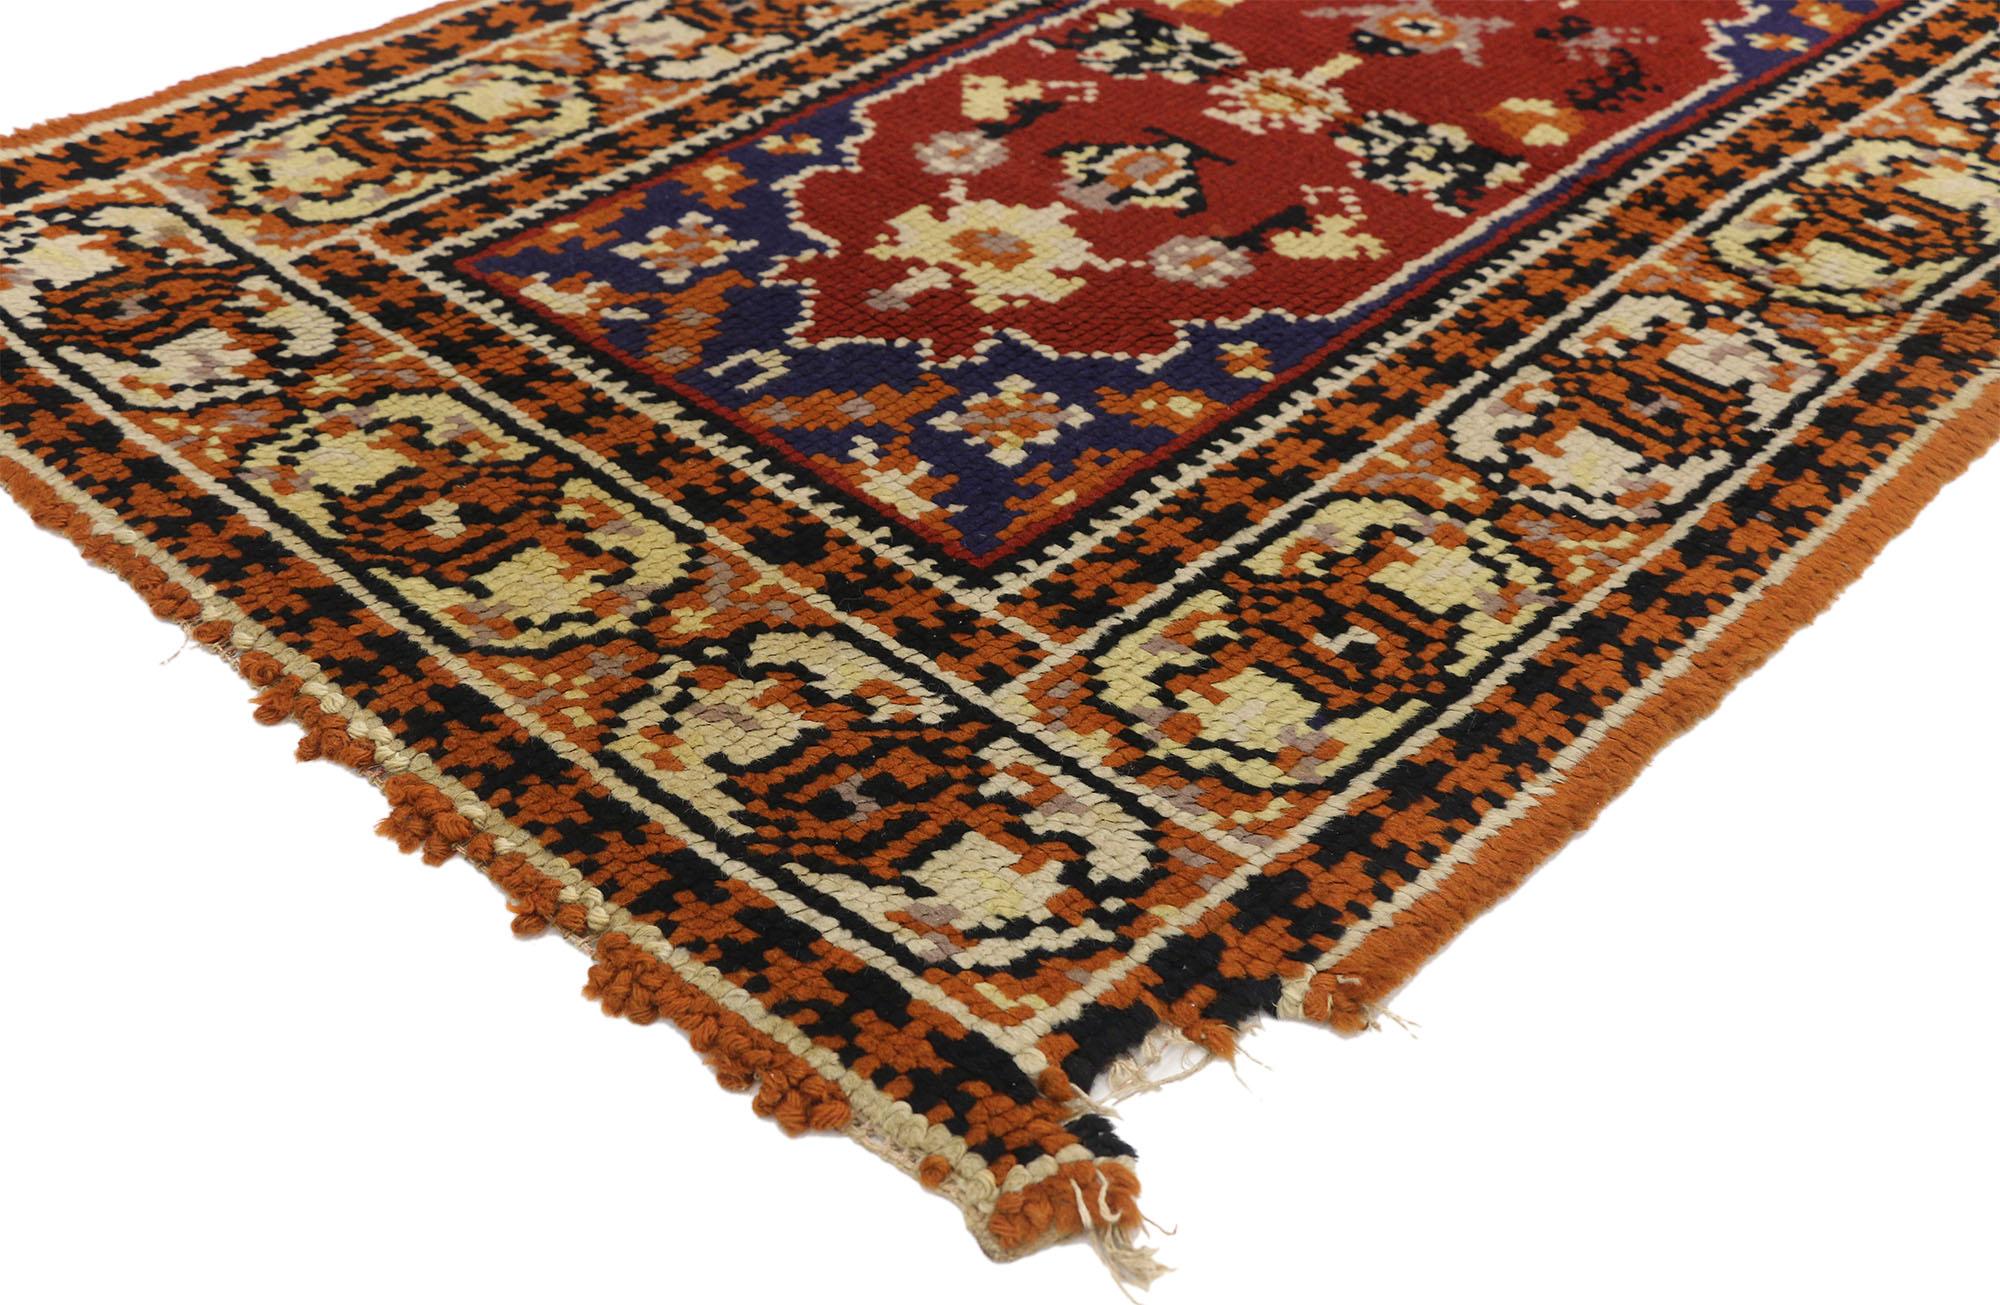 74638 Small Vintage European Rug, 03'00 x 04'10. Nostalgic charm meets rugged beauty in this hand knotted wool vintage European rug. The abstract botanical design and traditional color palette woven into this piece work creating a rustic yet refined